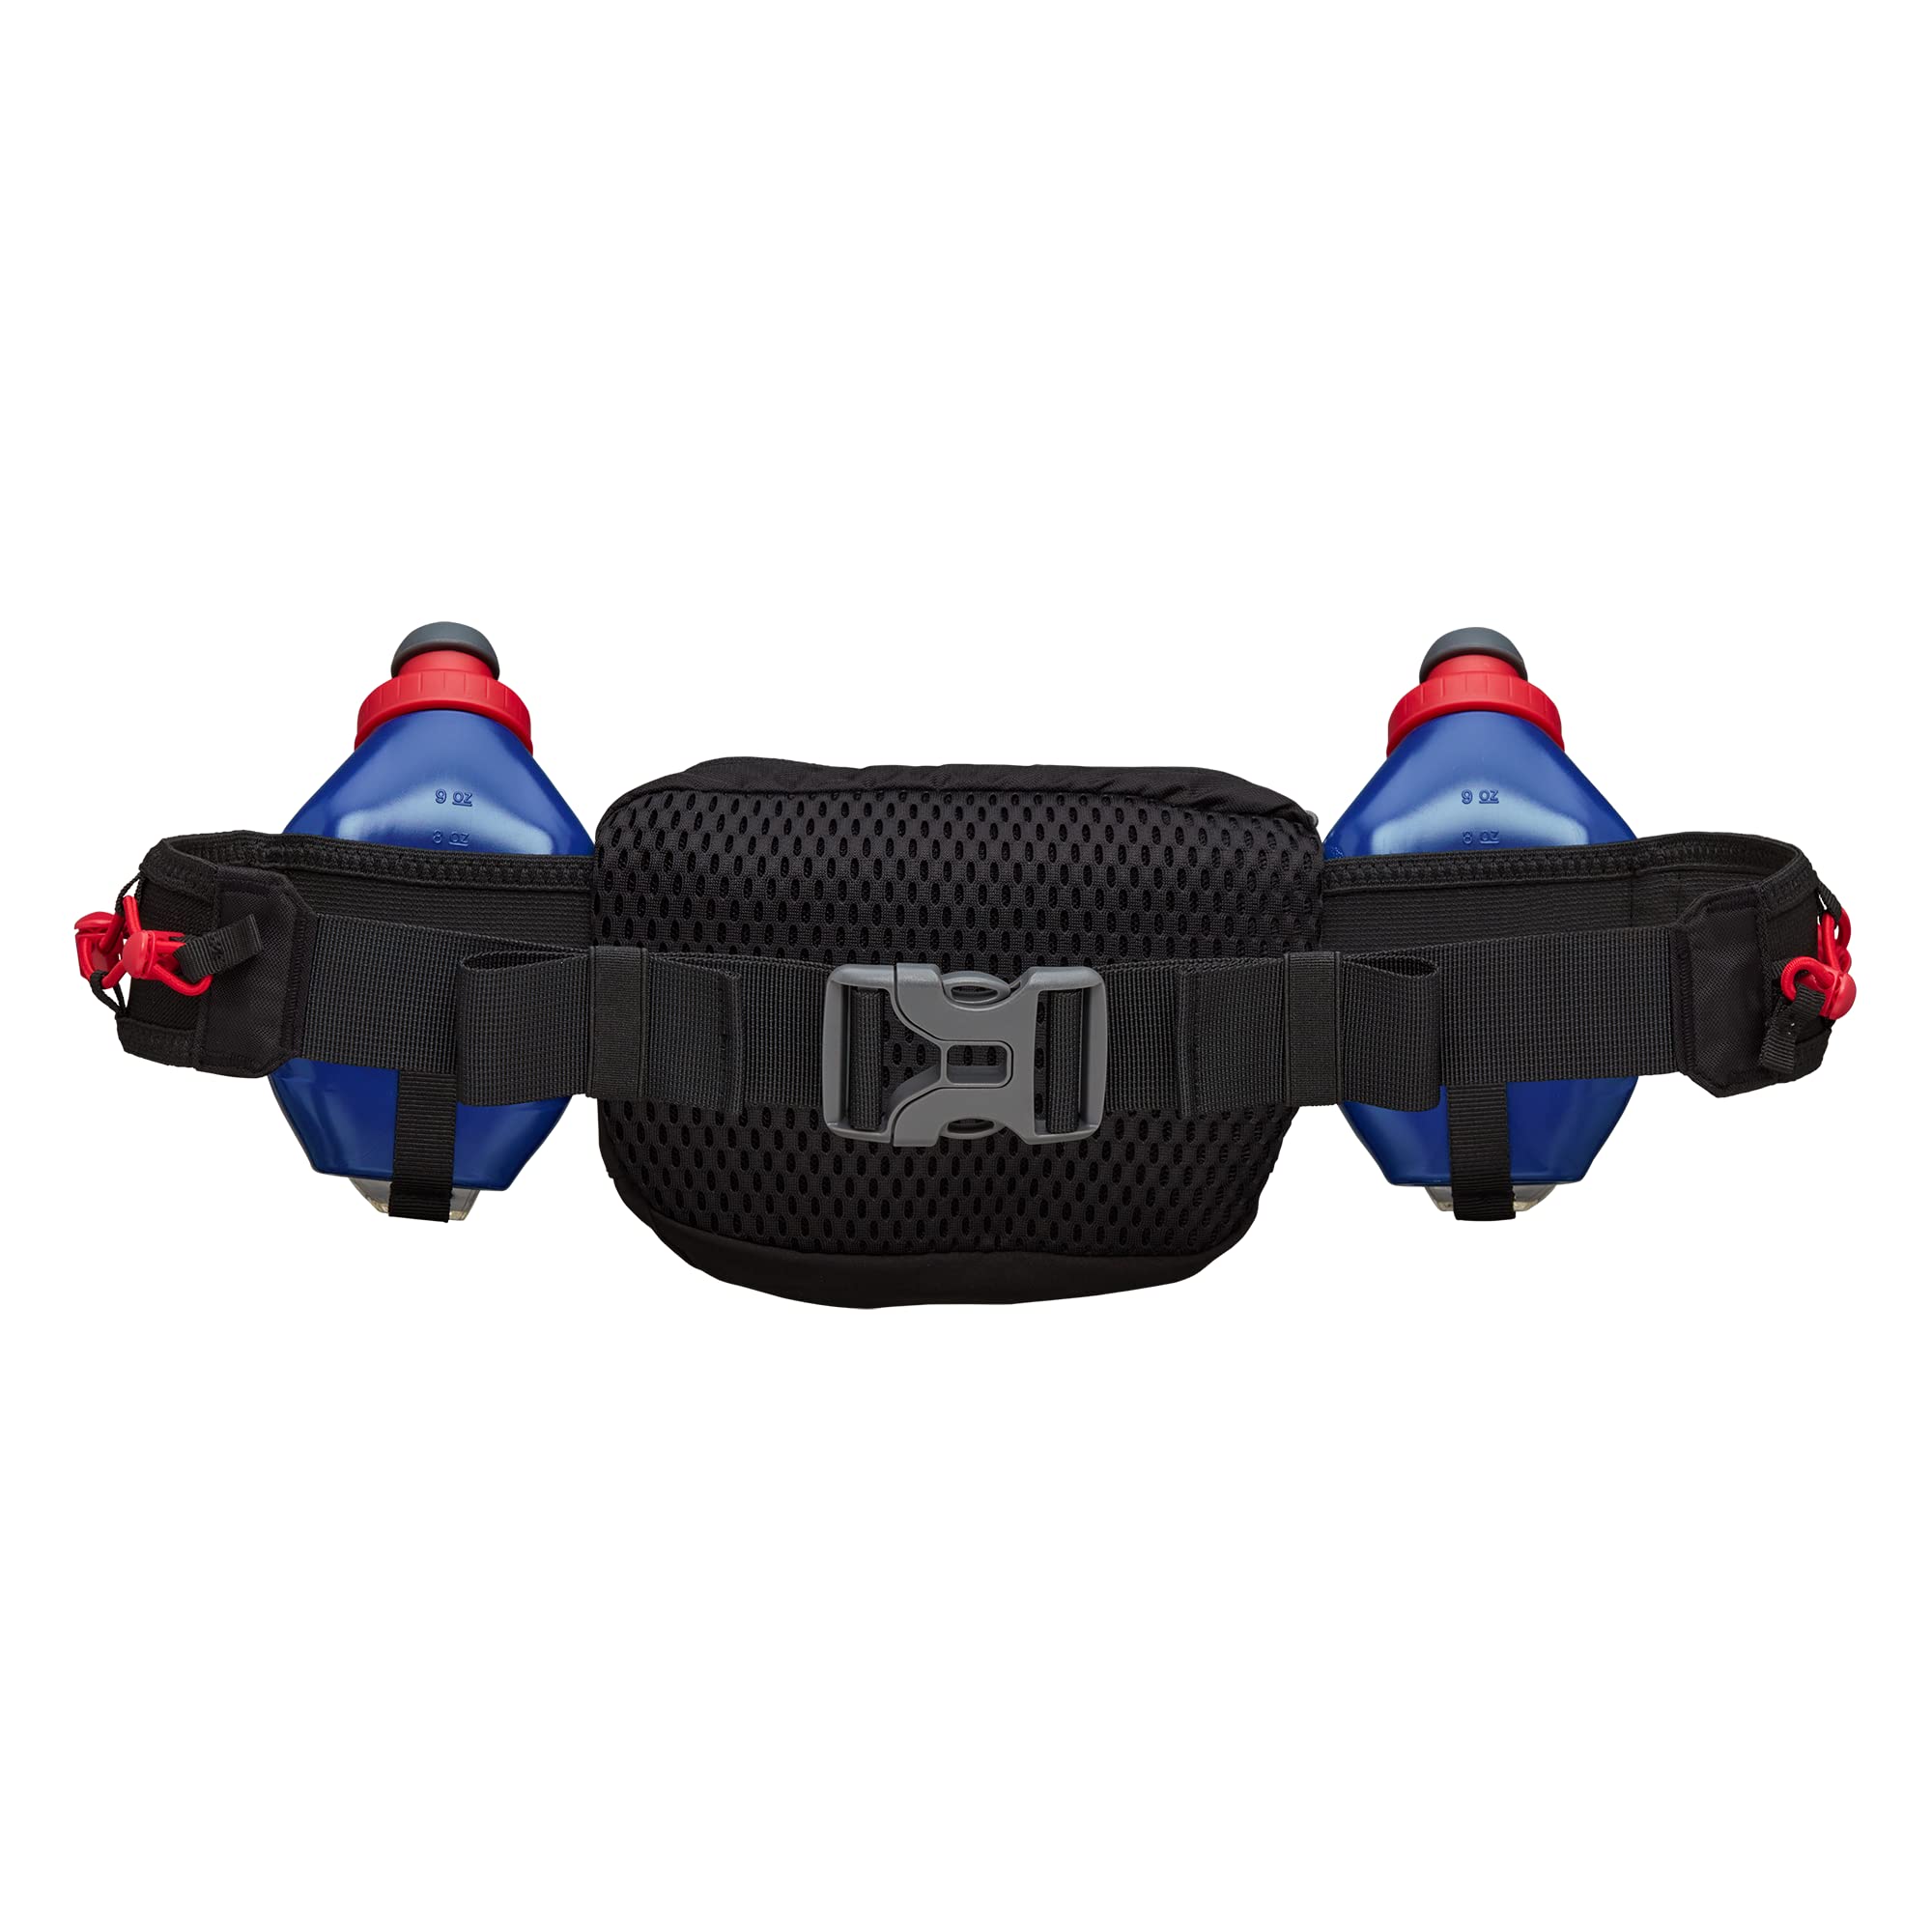 Nathan Hydration Running Belt with Flasks and Storage Pockets. Trail Mix Plus.